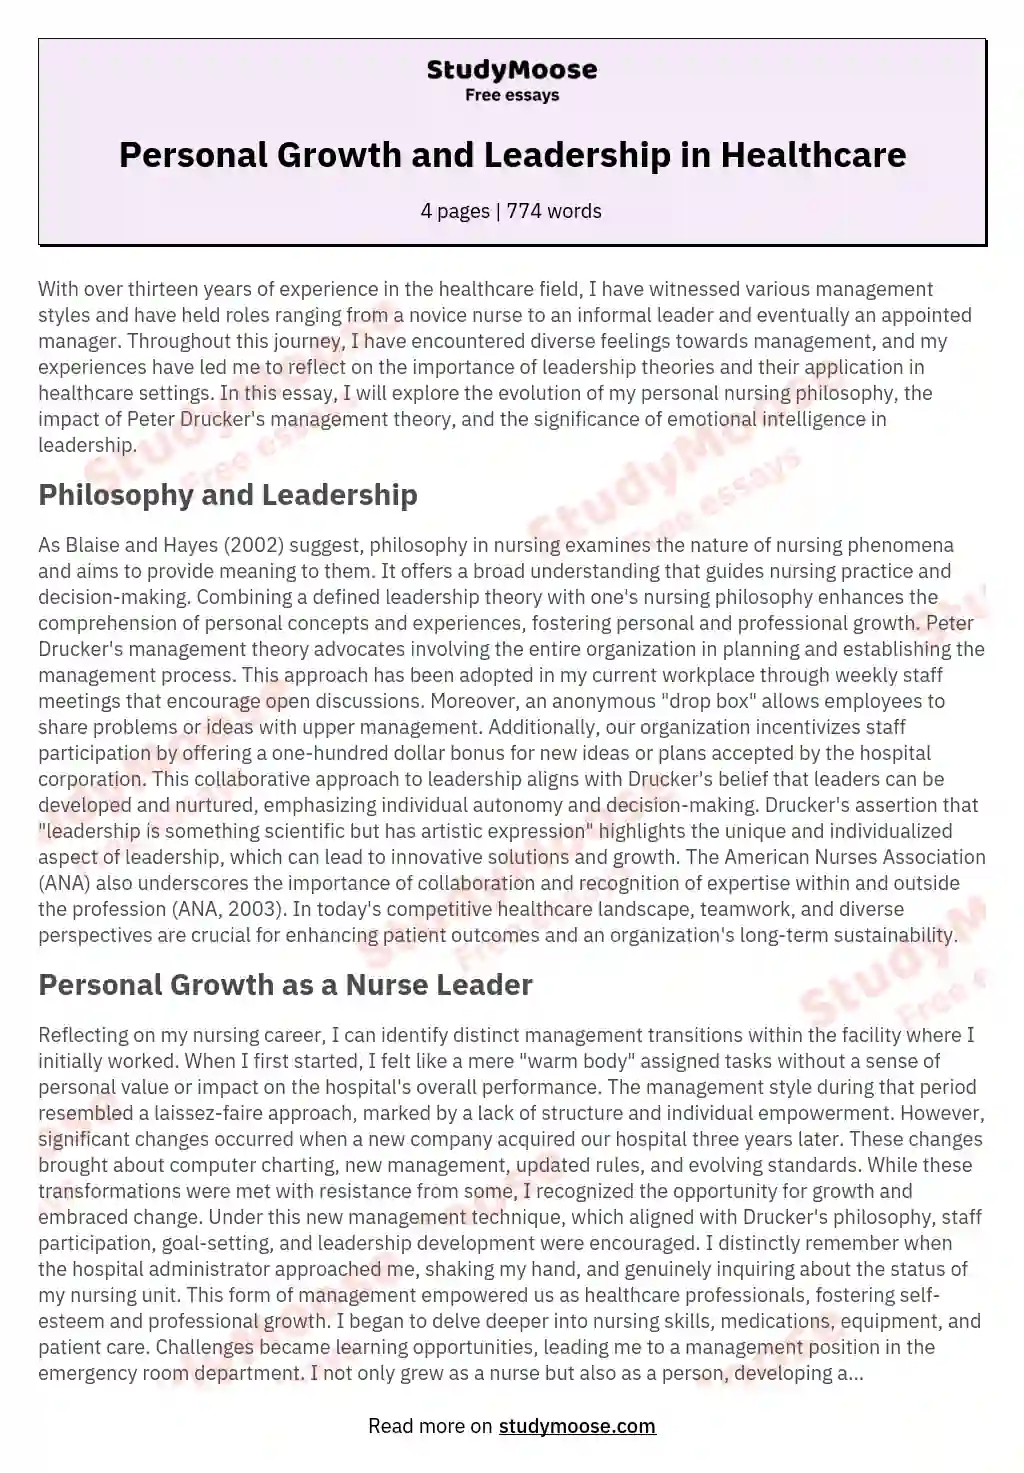 Personal Growth and Leadership in Healthcare